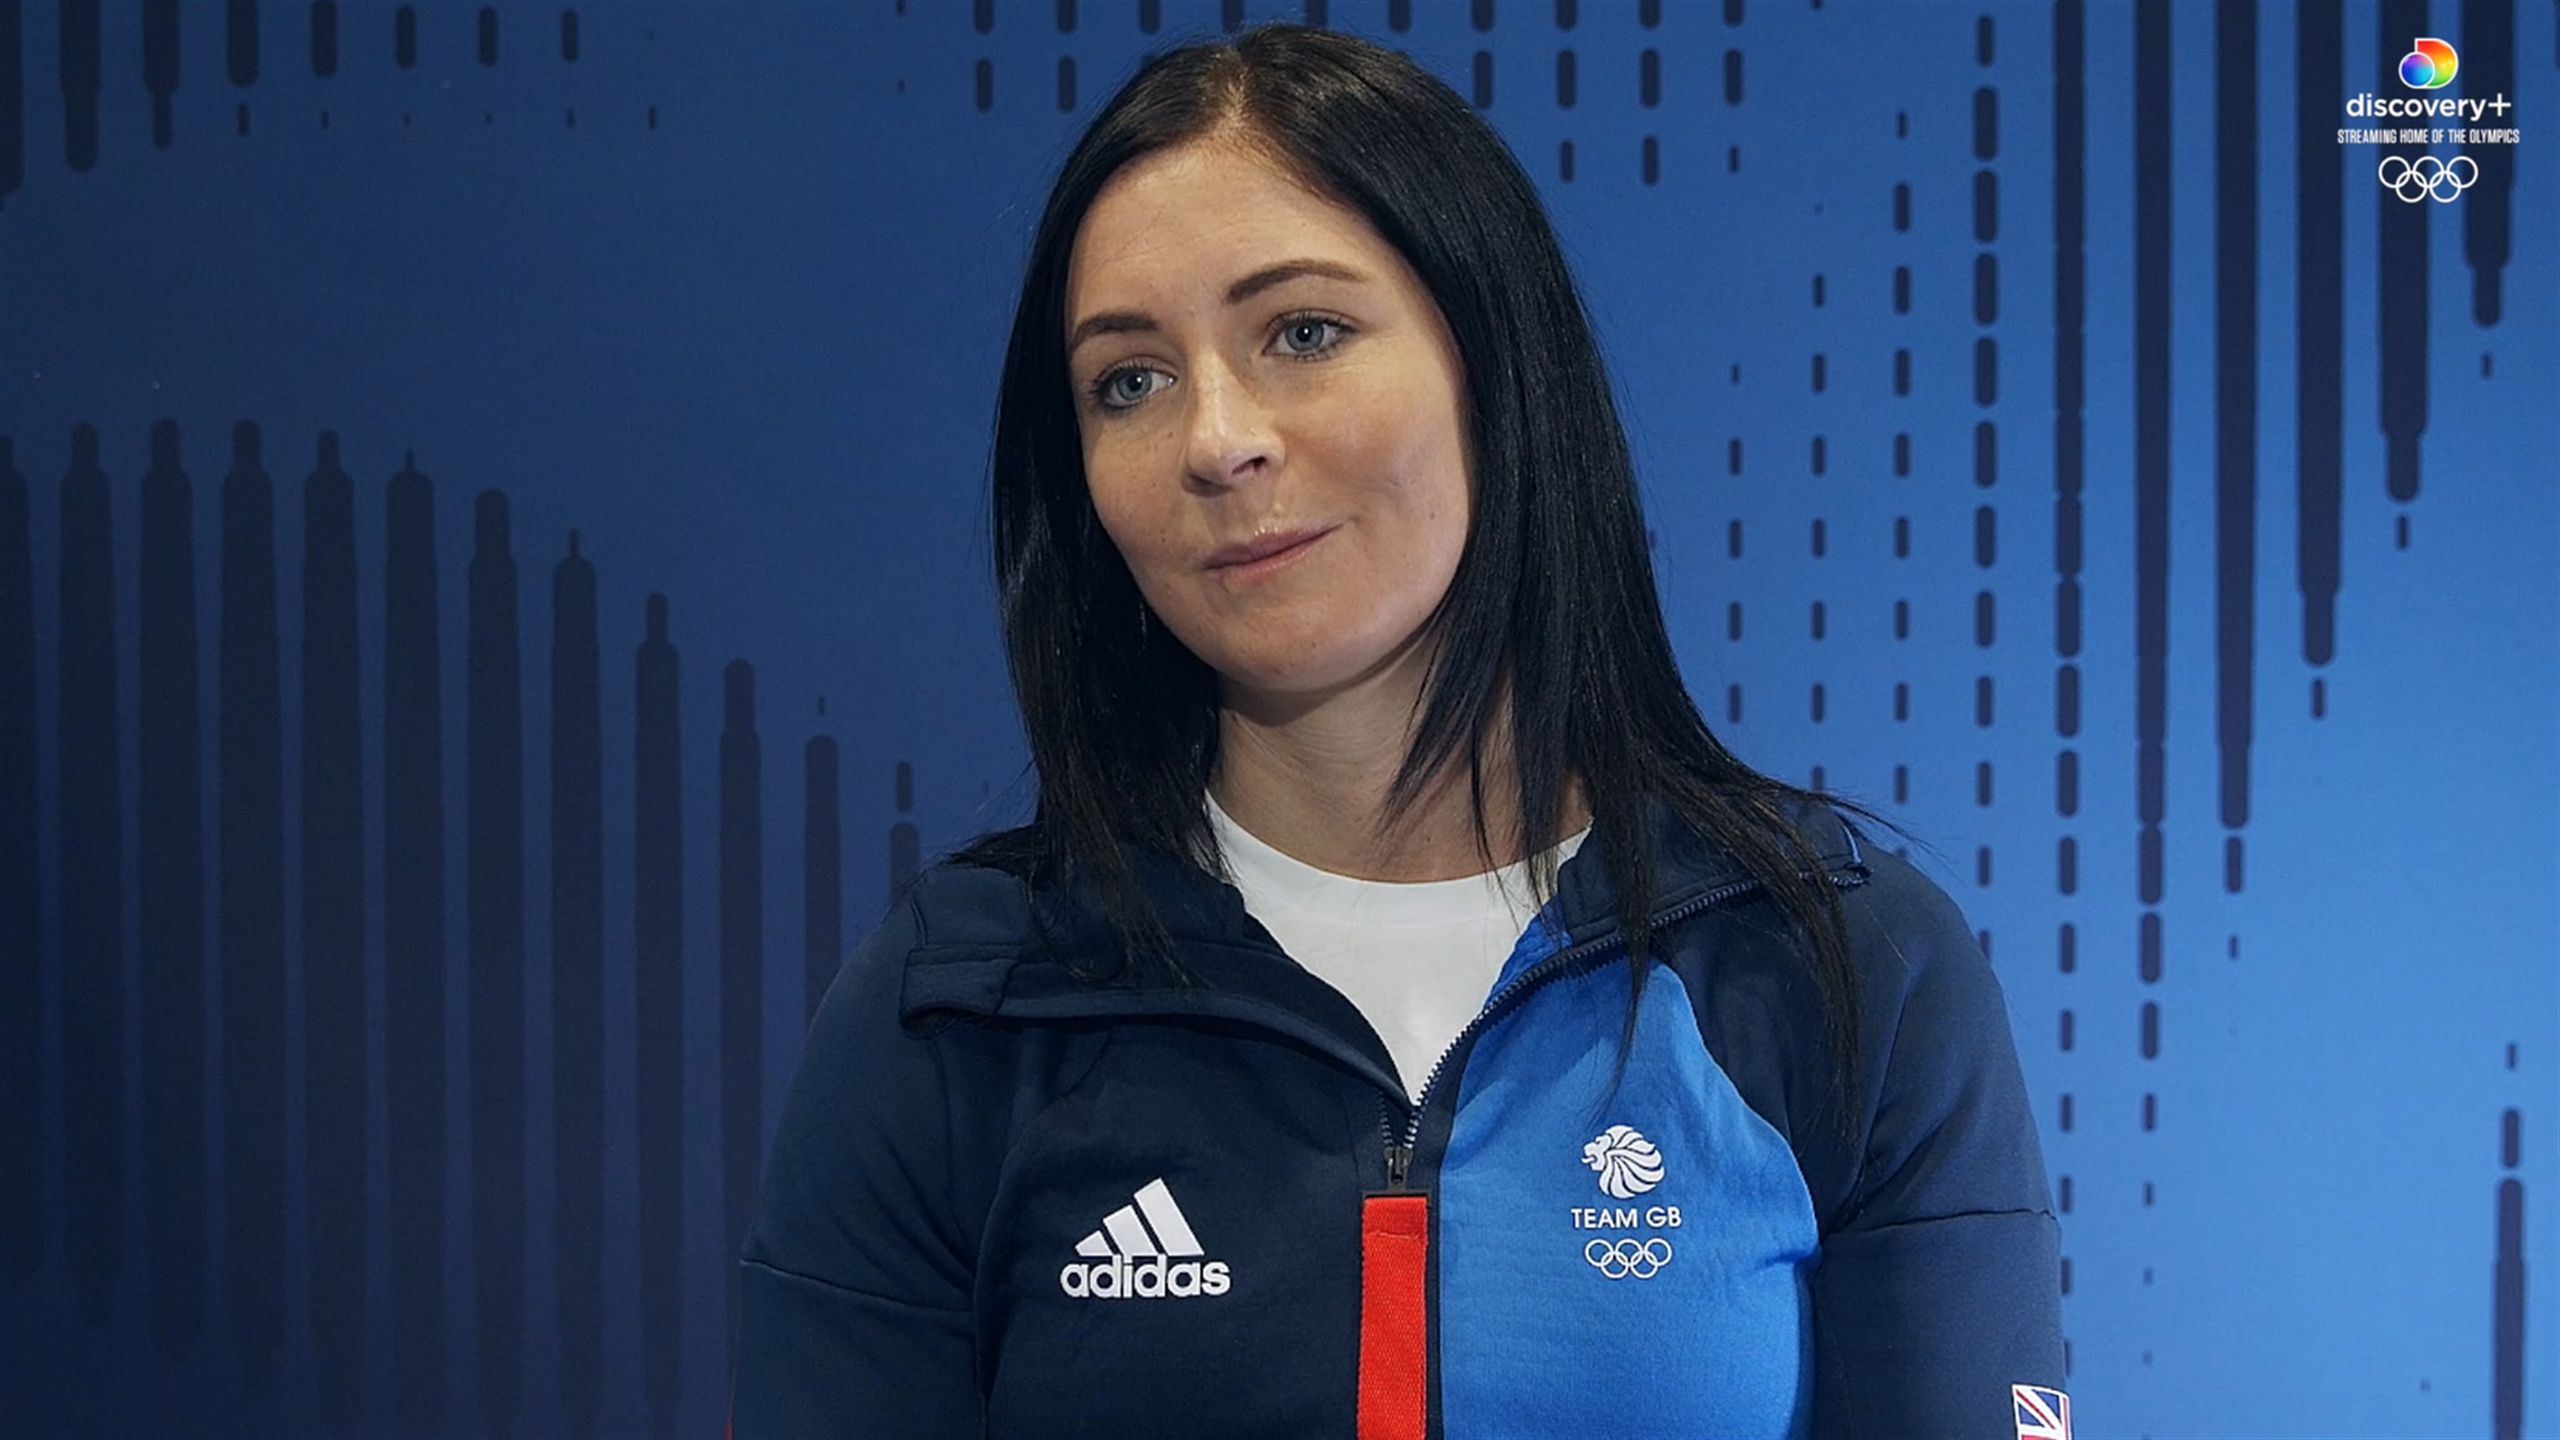 Team GBs Eve Muirhead and Grant Hardie get set for Beijing 2022 curling conquests - Curling video